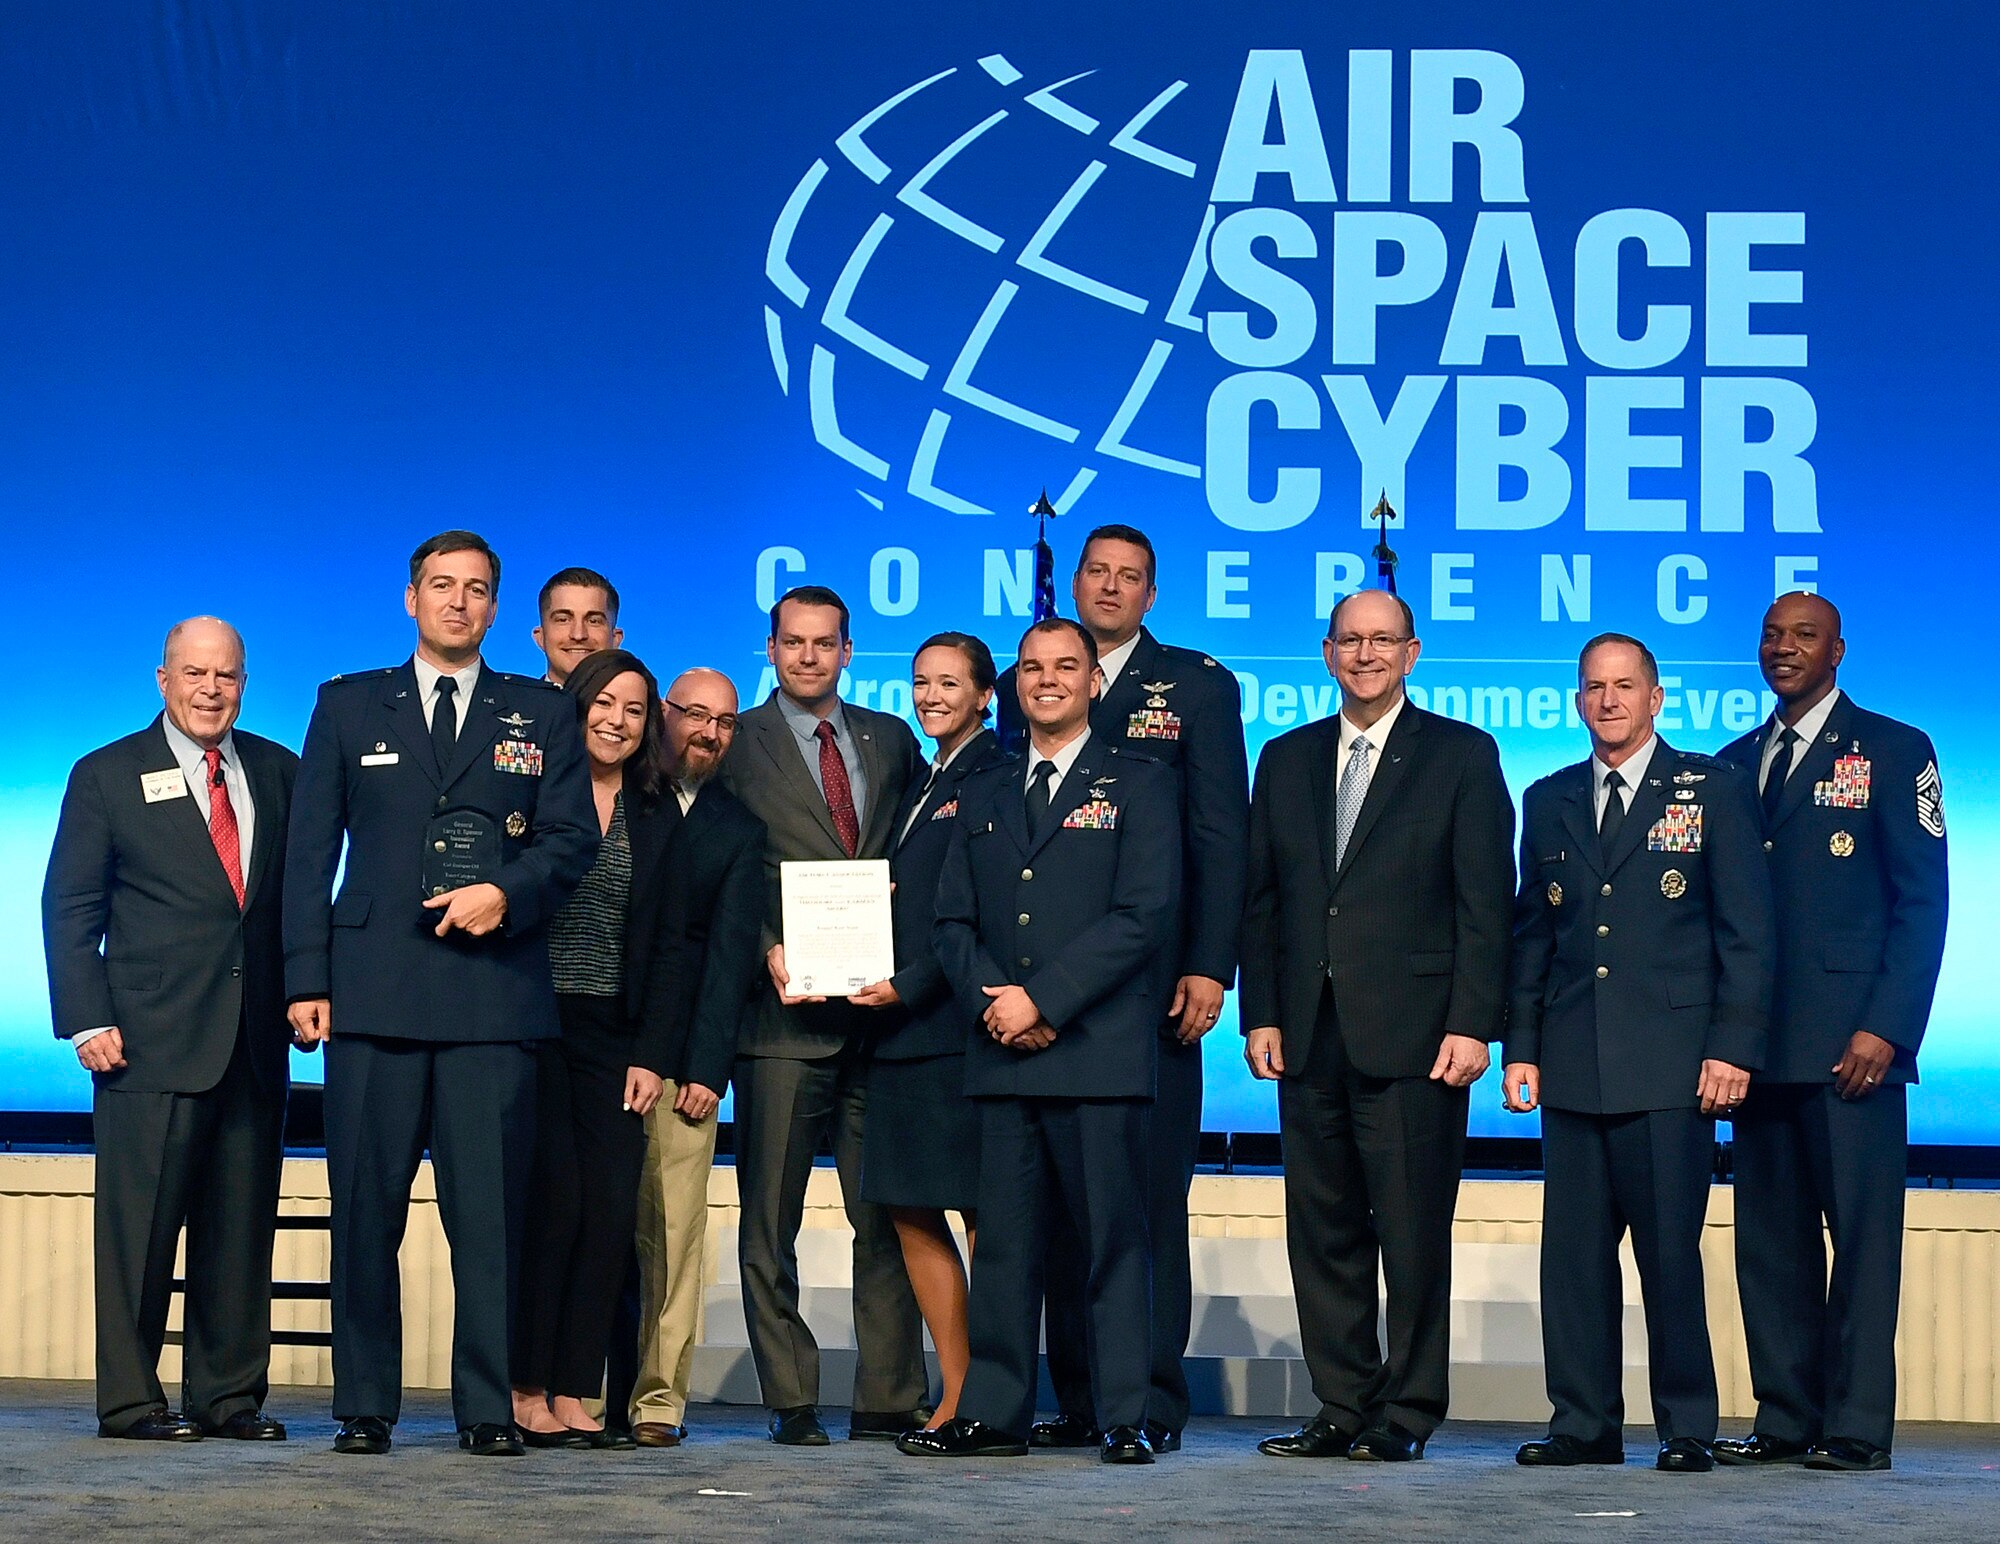 The Kessel Run Team receives the Gen. Larry O. Spencer Innovation Award from Air Force Chief of Staff Gen. David L. Goldfein, Acting Secretary of the Air Force Matthew Donovan, Chief Master Sgt. of the Air Force Kaleth Wright and Whit Peters, Chairman of the Air Force Association Board, during the Air Force Association Air, Space and Cyber Conference in National Harbor, Md., Sept. 16, 2019.(U.S. Air Force photo by Andy Morataya)